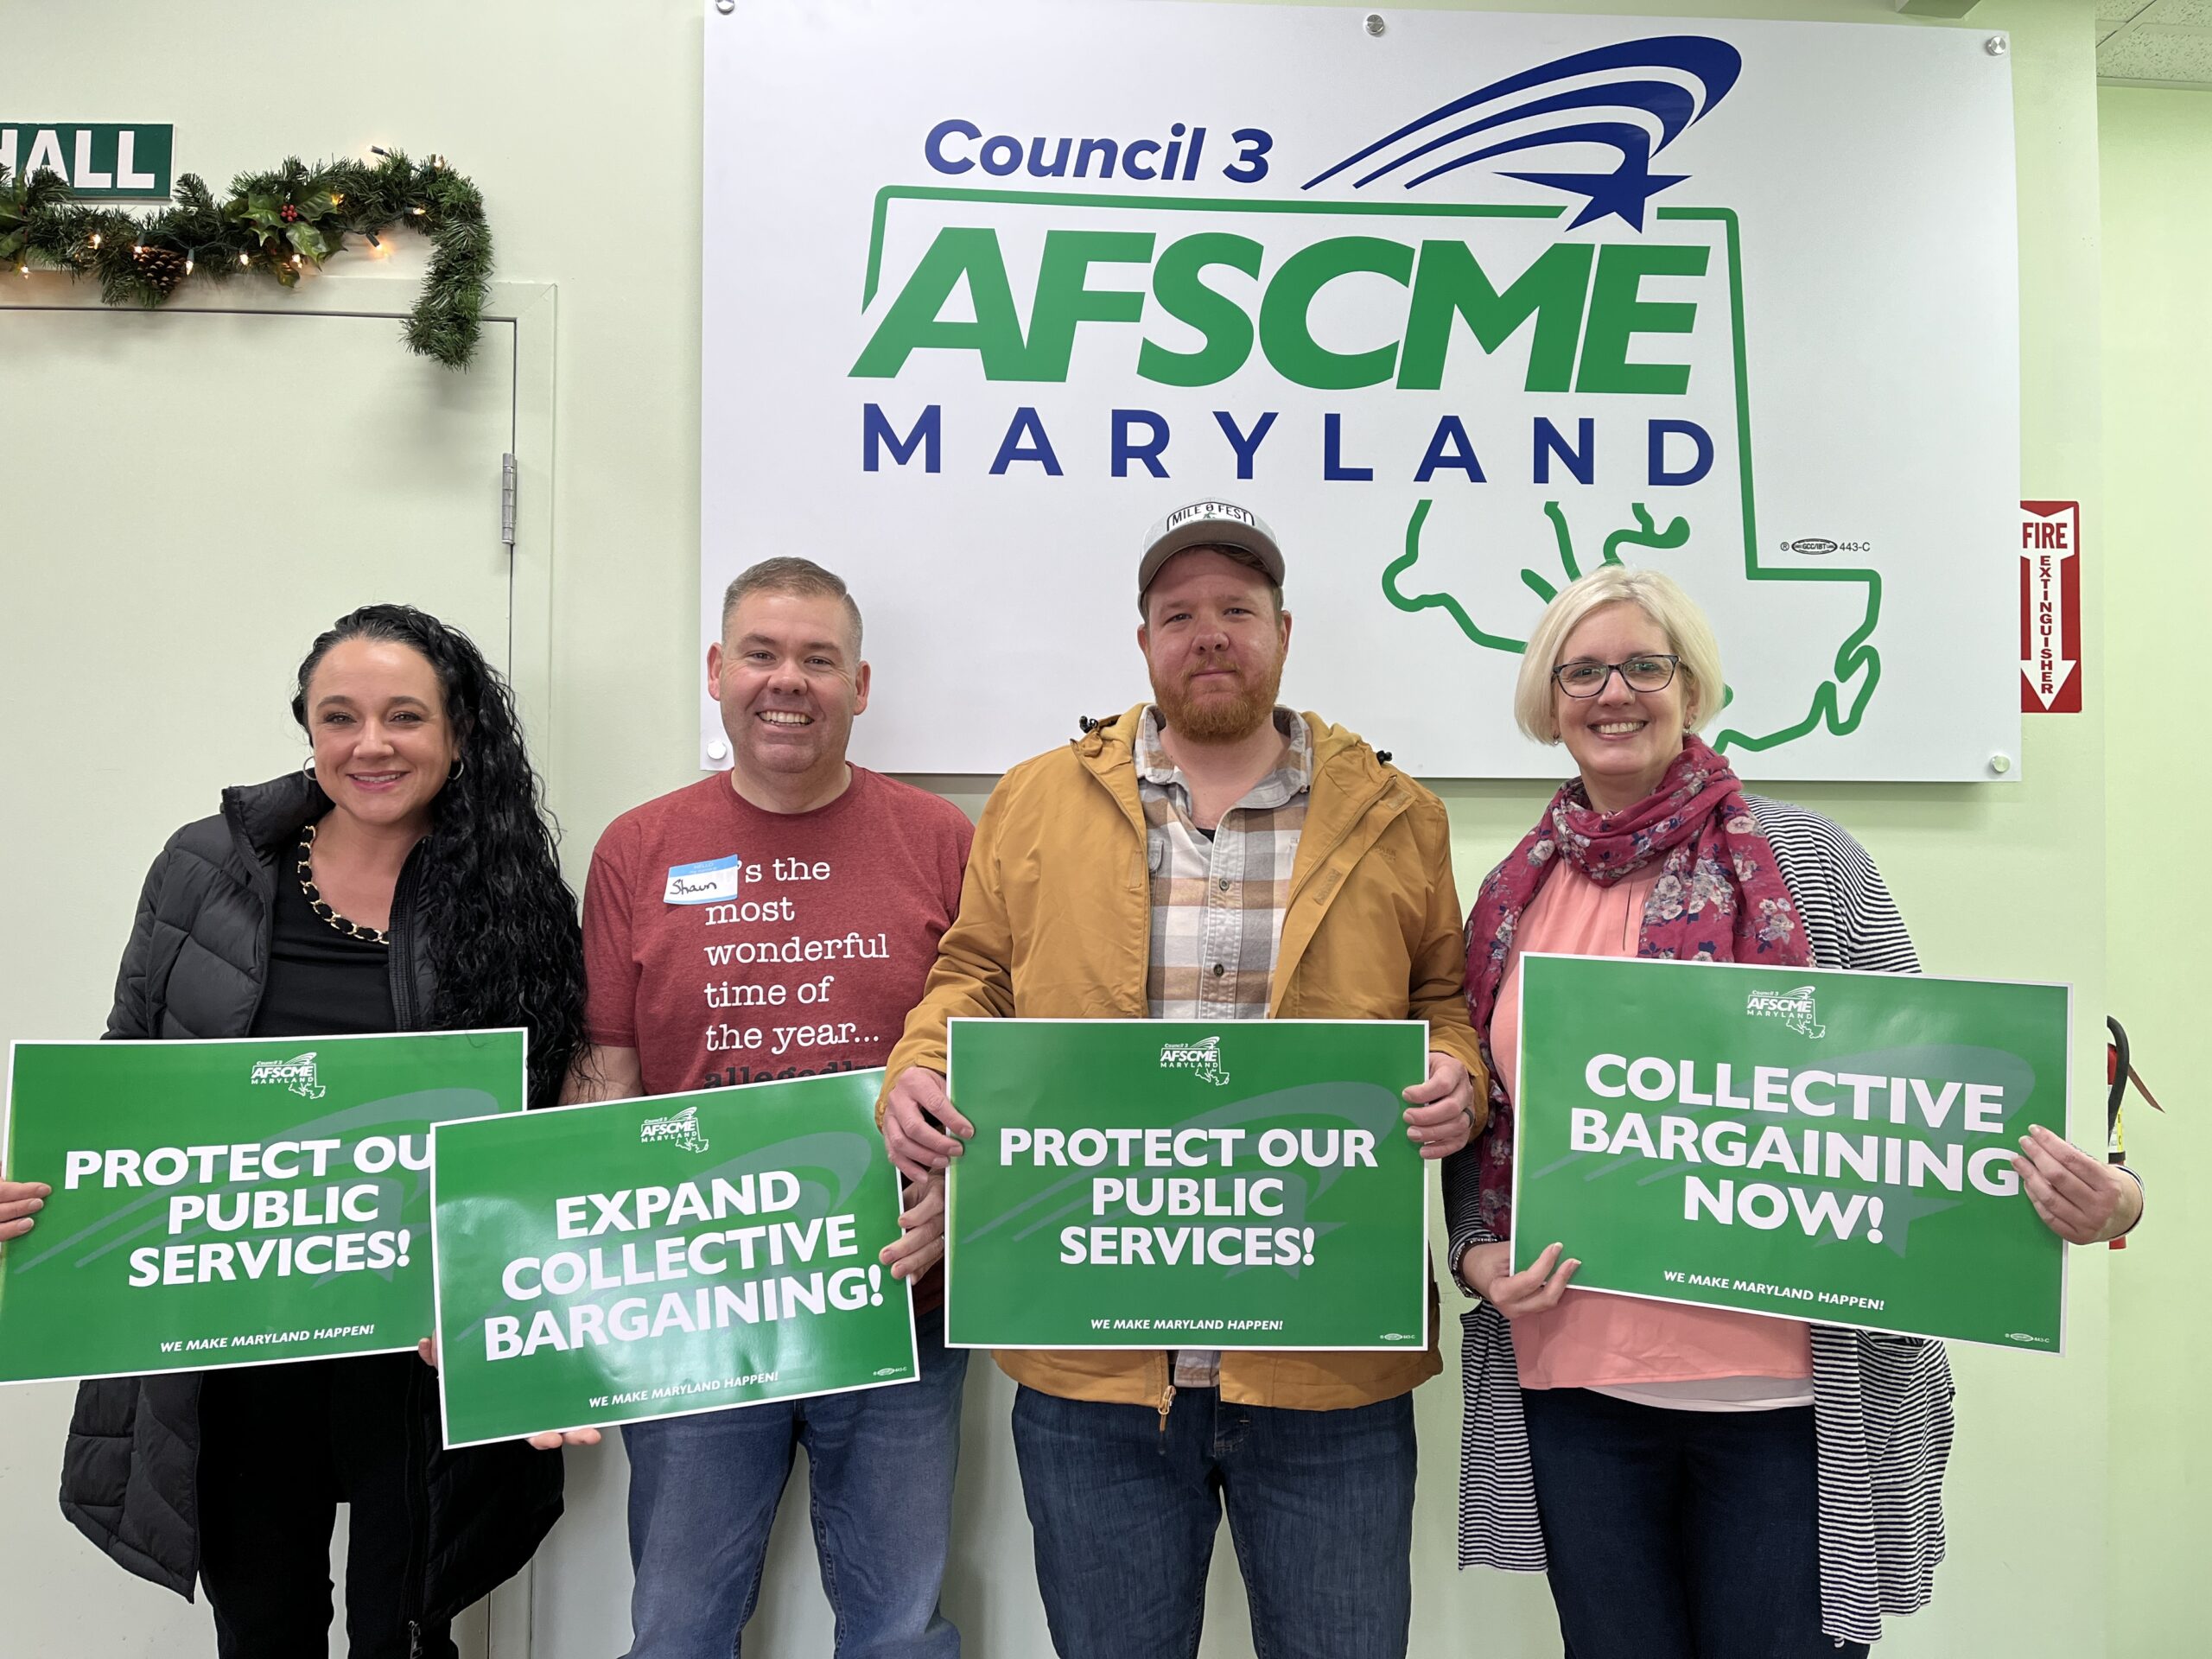 AFSCME supervisor members posing in front of an AFSCME Maryland sign each holding a sign that supports expanding collective bargaining rights to supervisors in Maryland